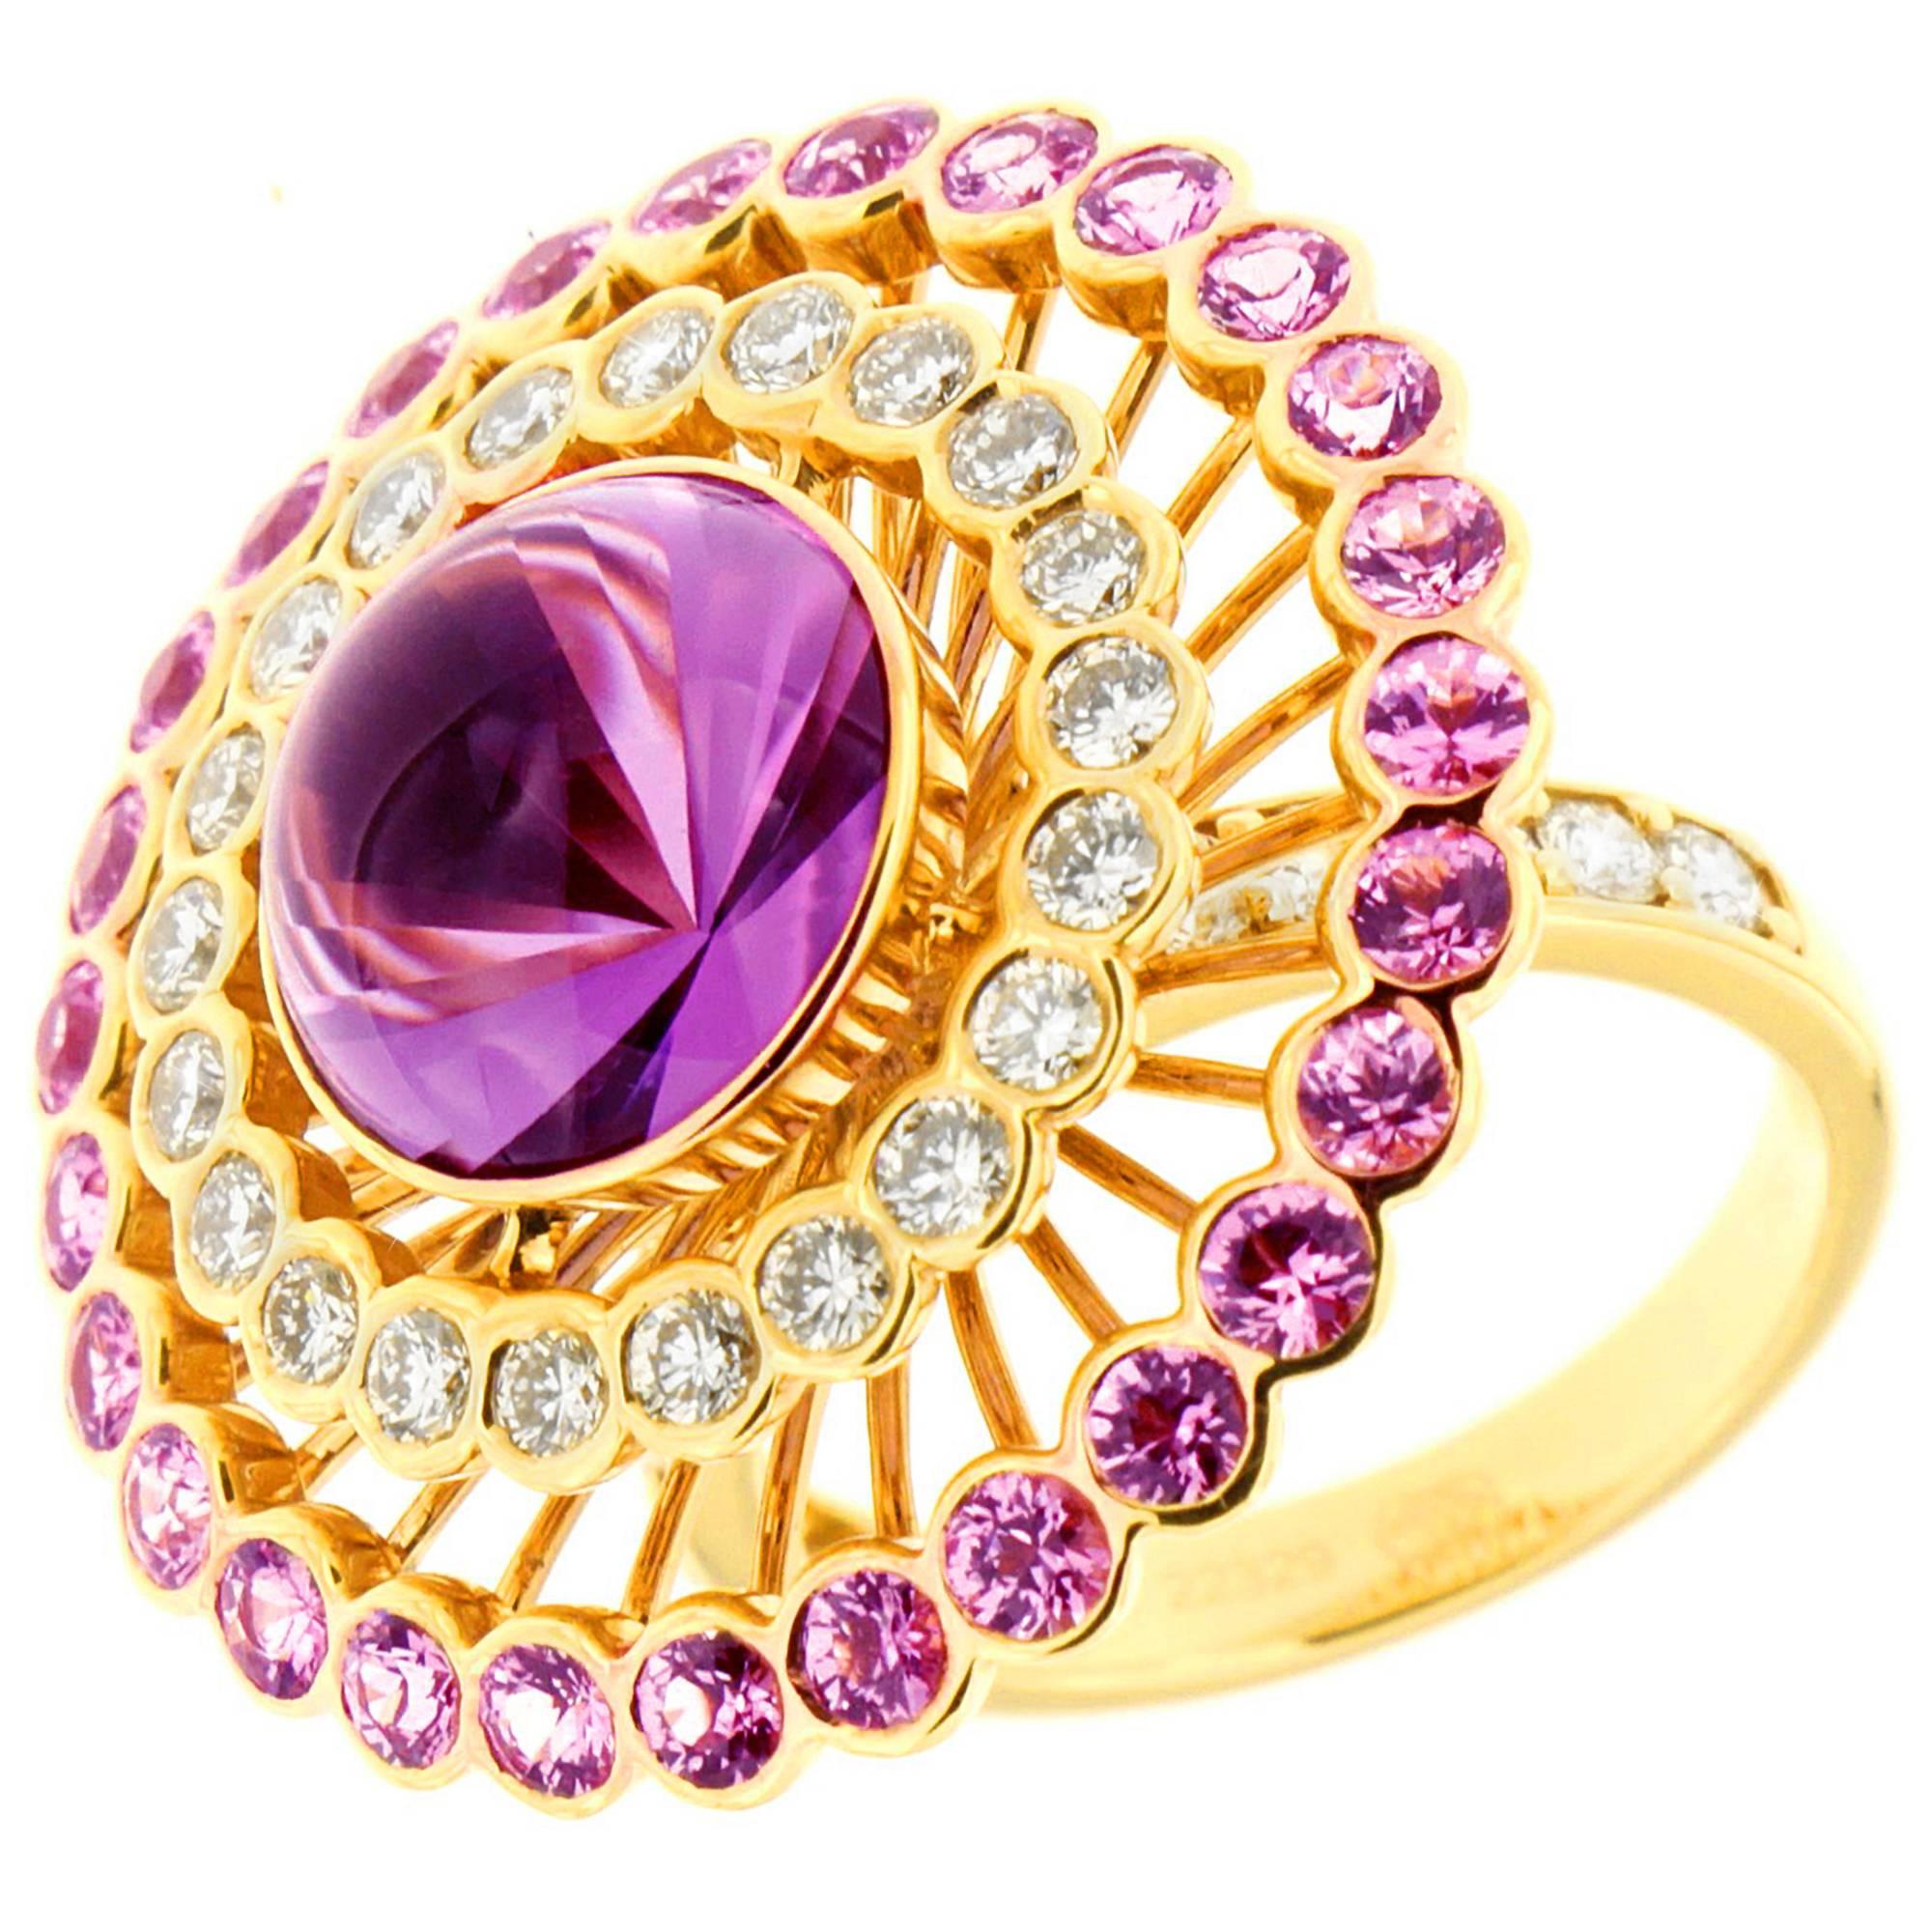 Large center amethyst 5.62 ct is surrounded by 1.65 cts diamonds in the inner circle. The outed circle is 2.87 cts pink sapphires. All in 18 kt yellow gold.
An absolutely spectacular ring.